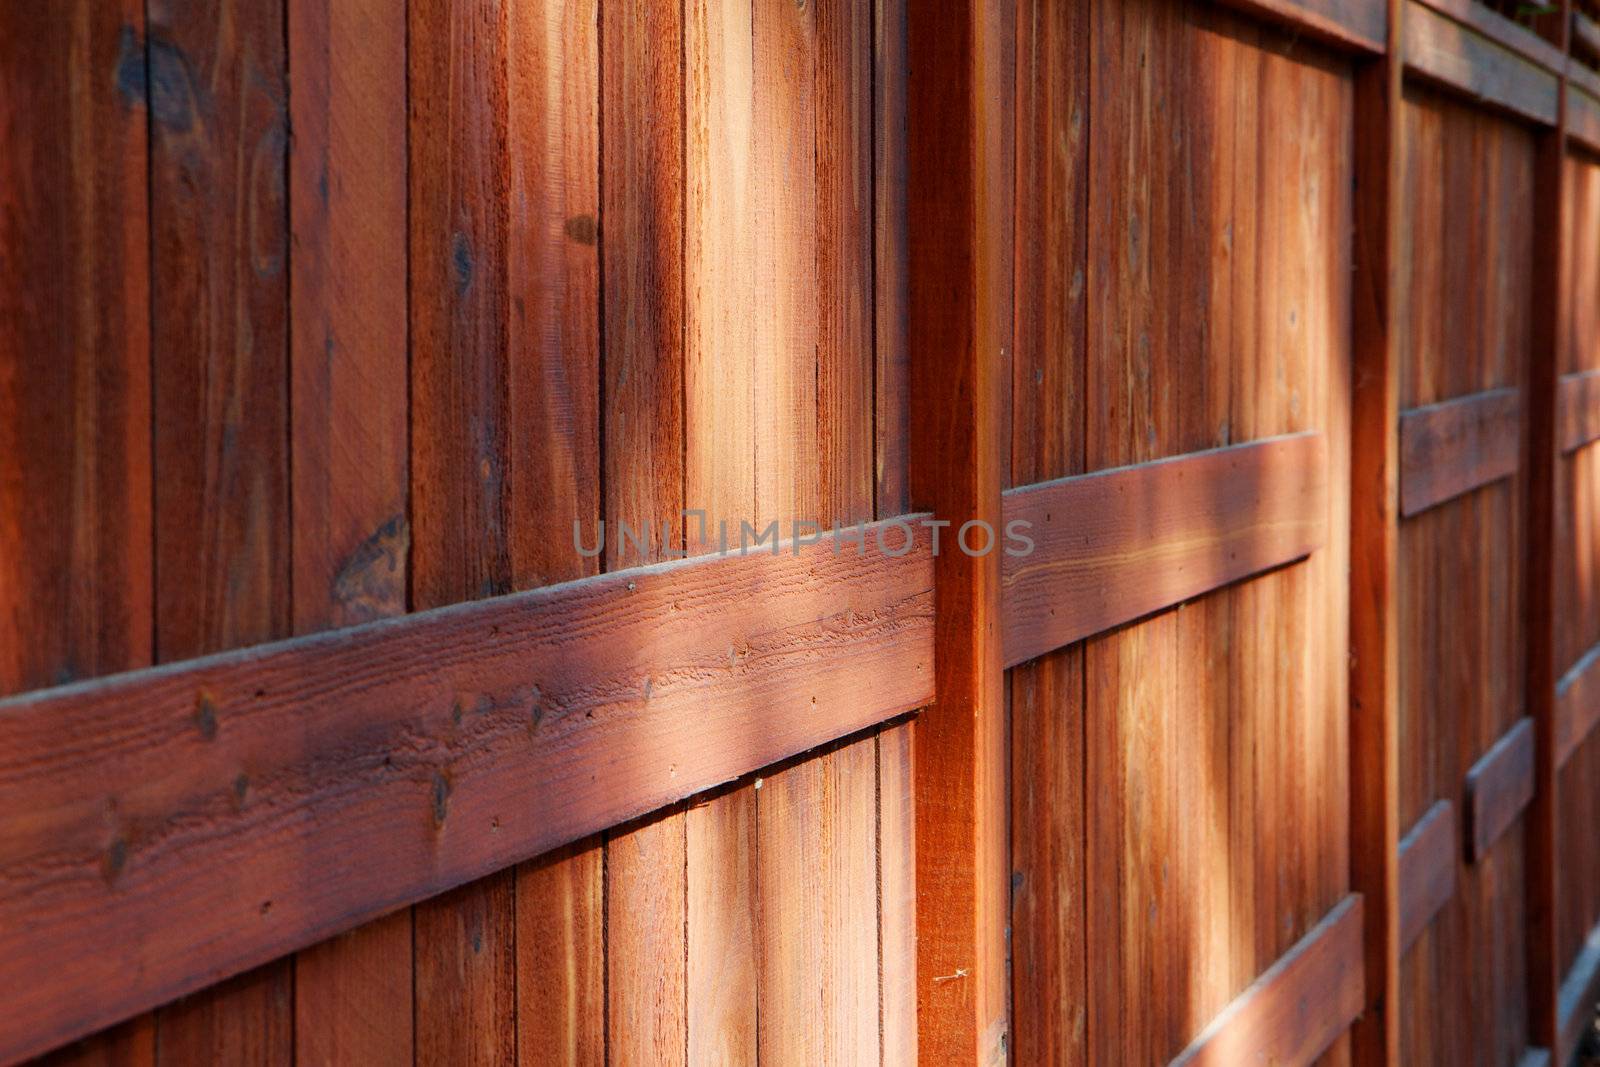 Stained redwood fence perspective by bobkeenan